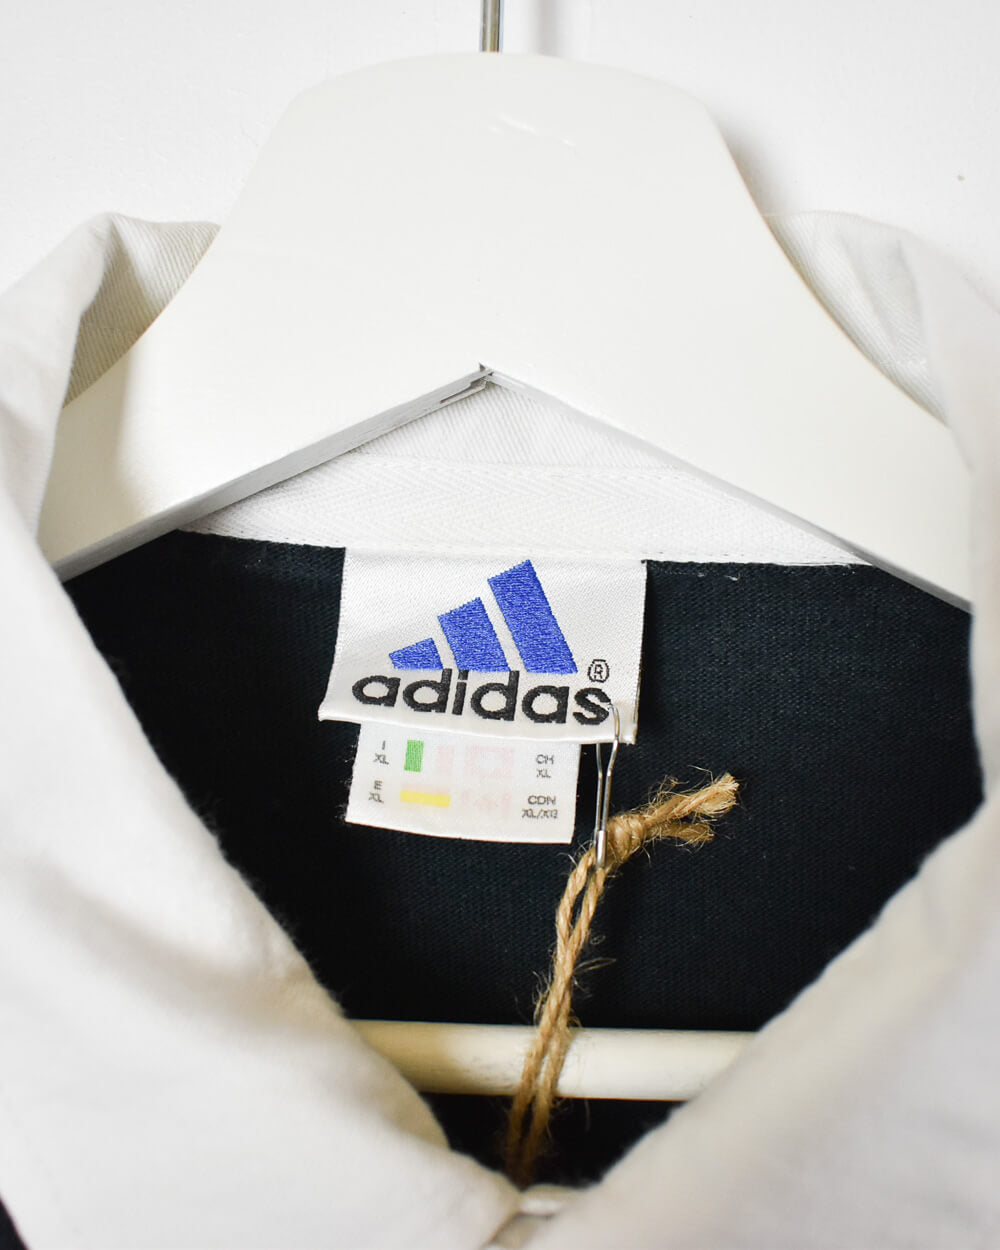 Black Adidas Cropped Rugby Shirt - X-Large